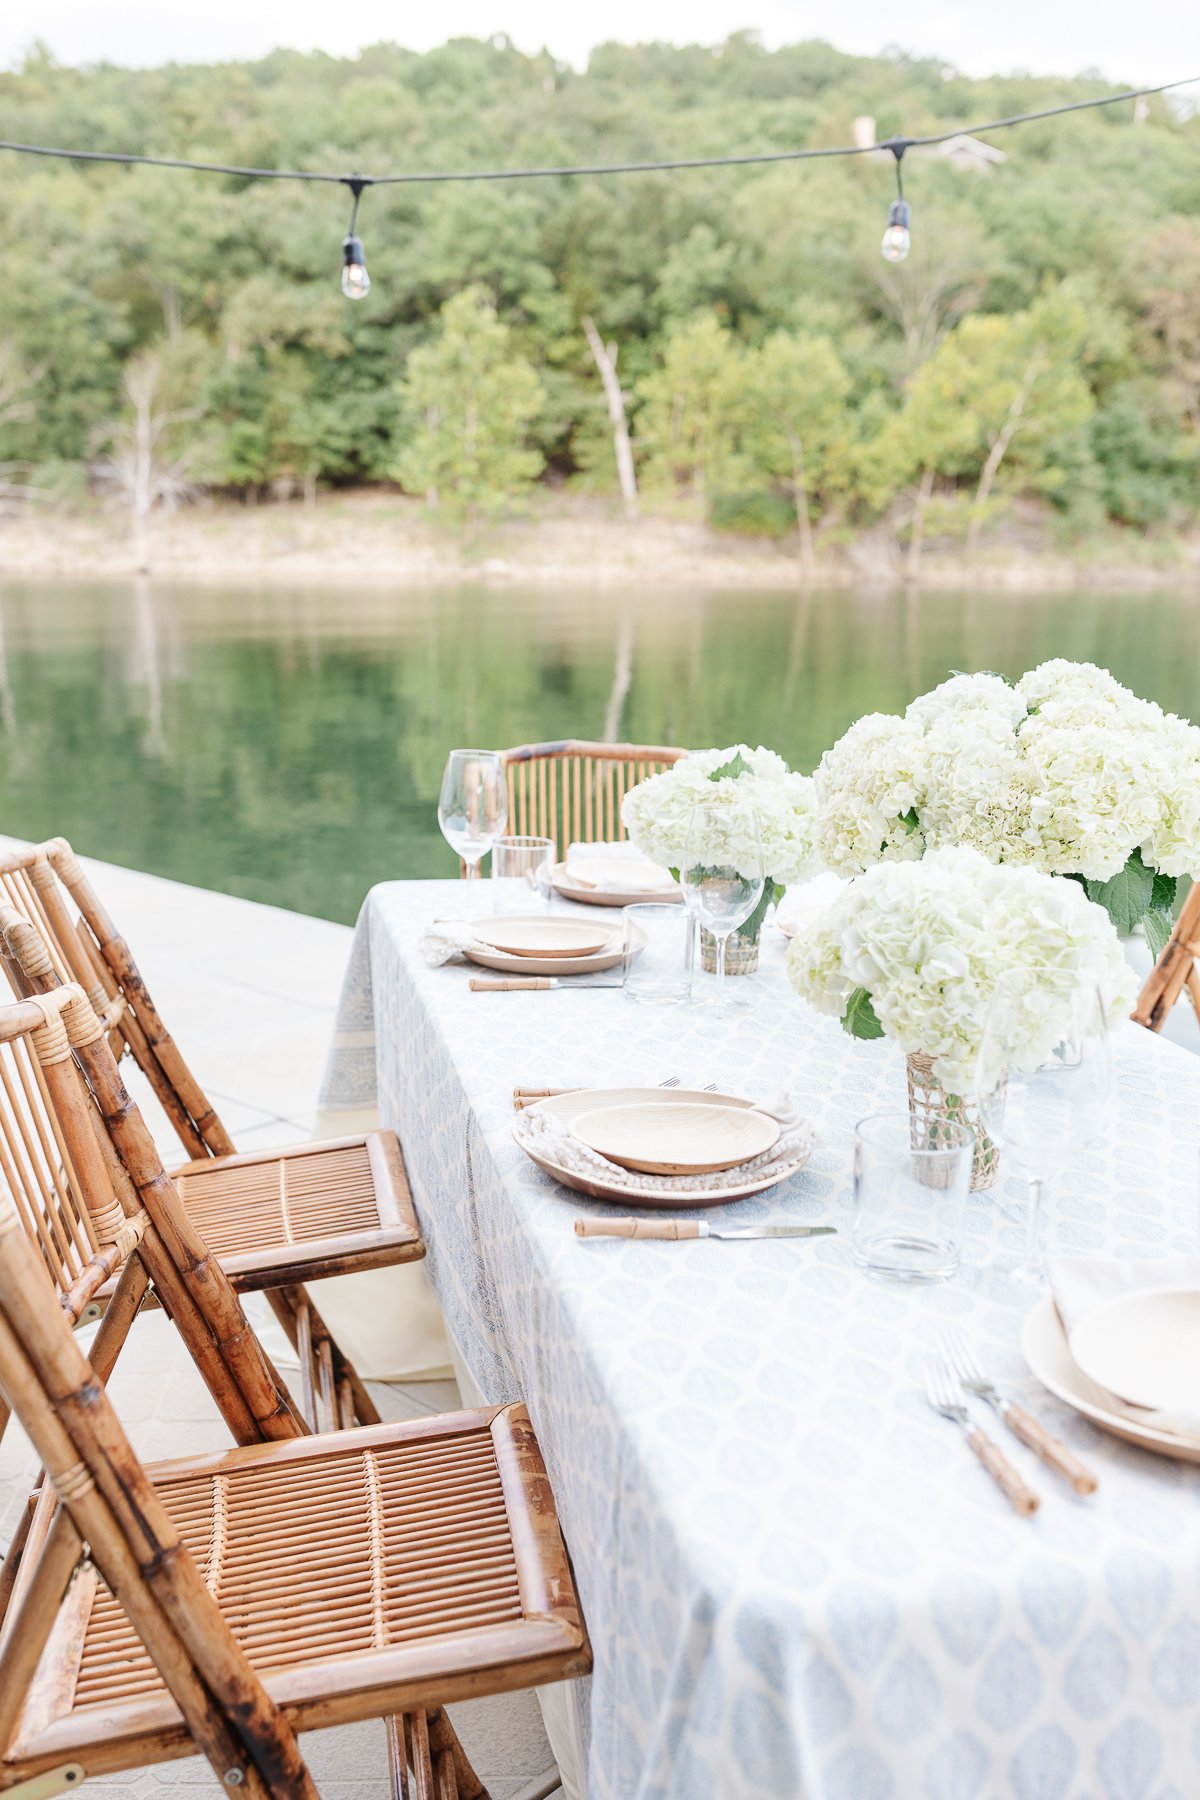 Elegant outdoor dining setup by a tranquil lake featuring a table with blue linens, wooden chairs, hydrangea centerpieces, and hanging string lights.